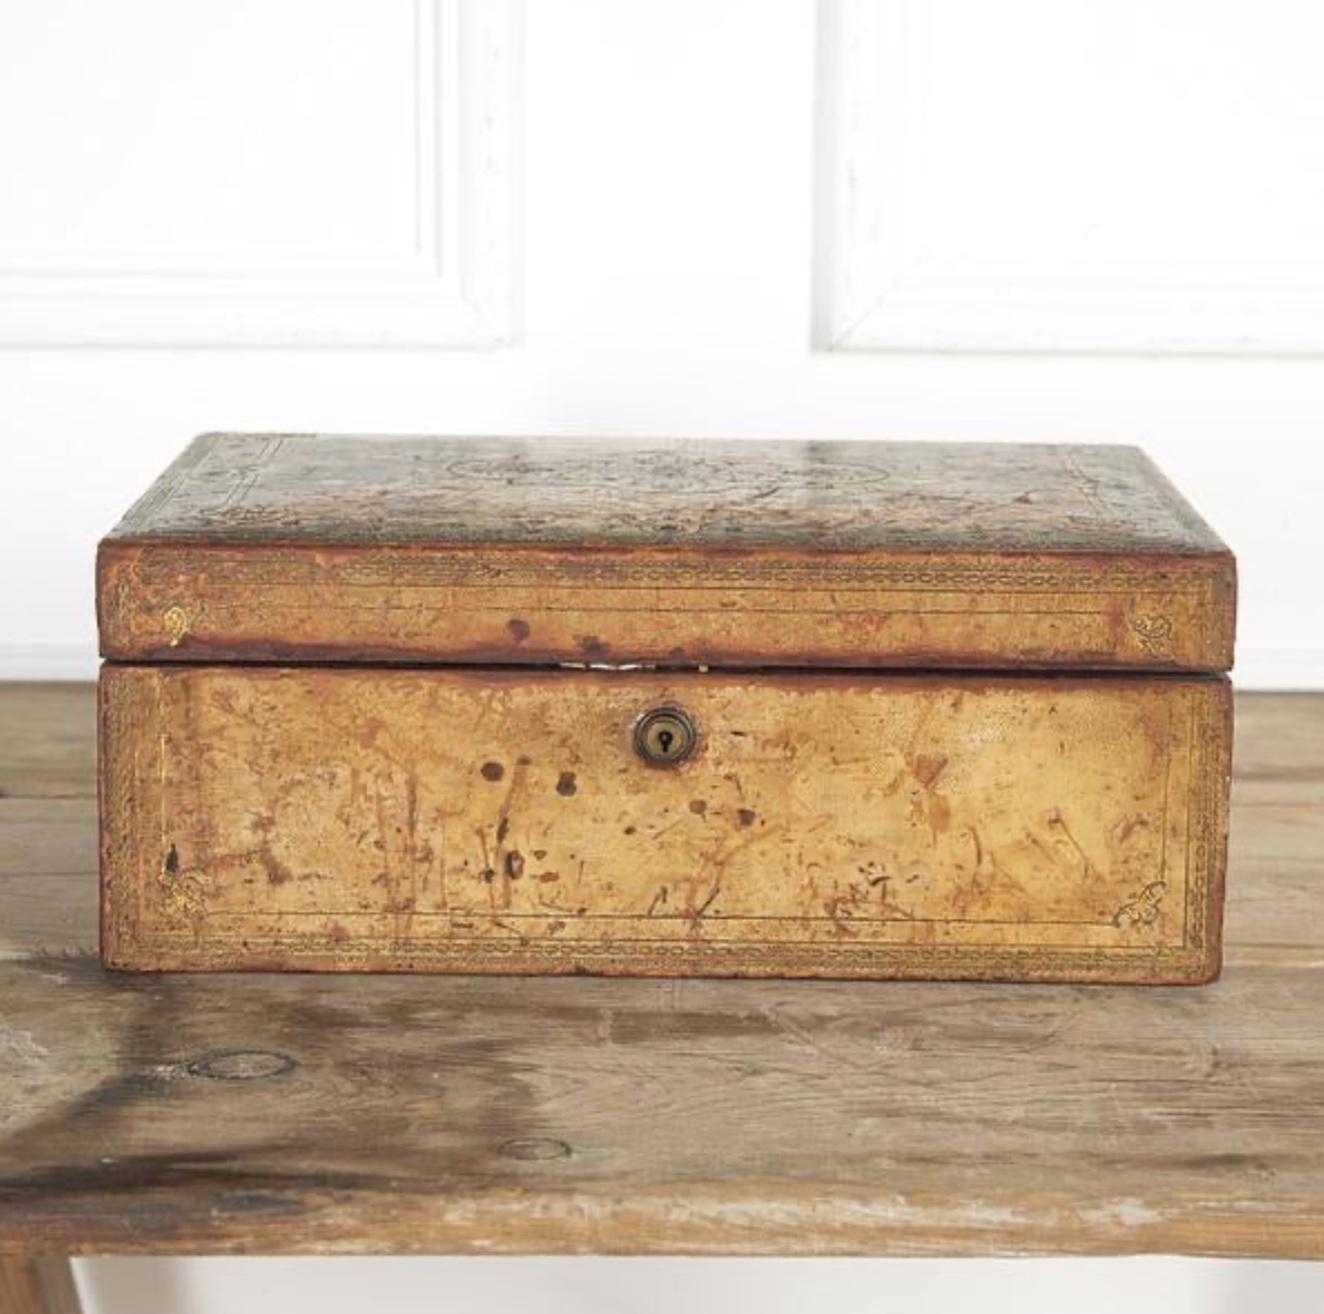 Embossed leather box from Victorian England. Simple yet elegant, this 1900s English storage vessel adds a touch of discreet charm to any desk or tabletop. 

England, circa 1900

Dimensions: 6H x 15W x 12D.